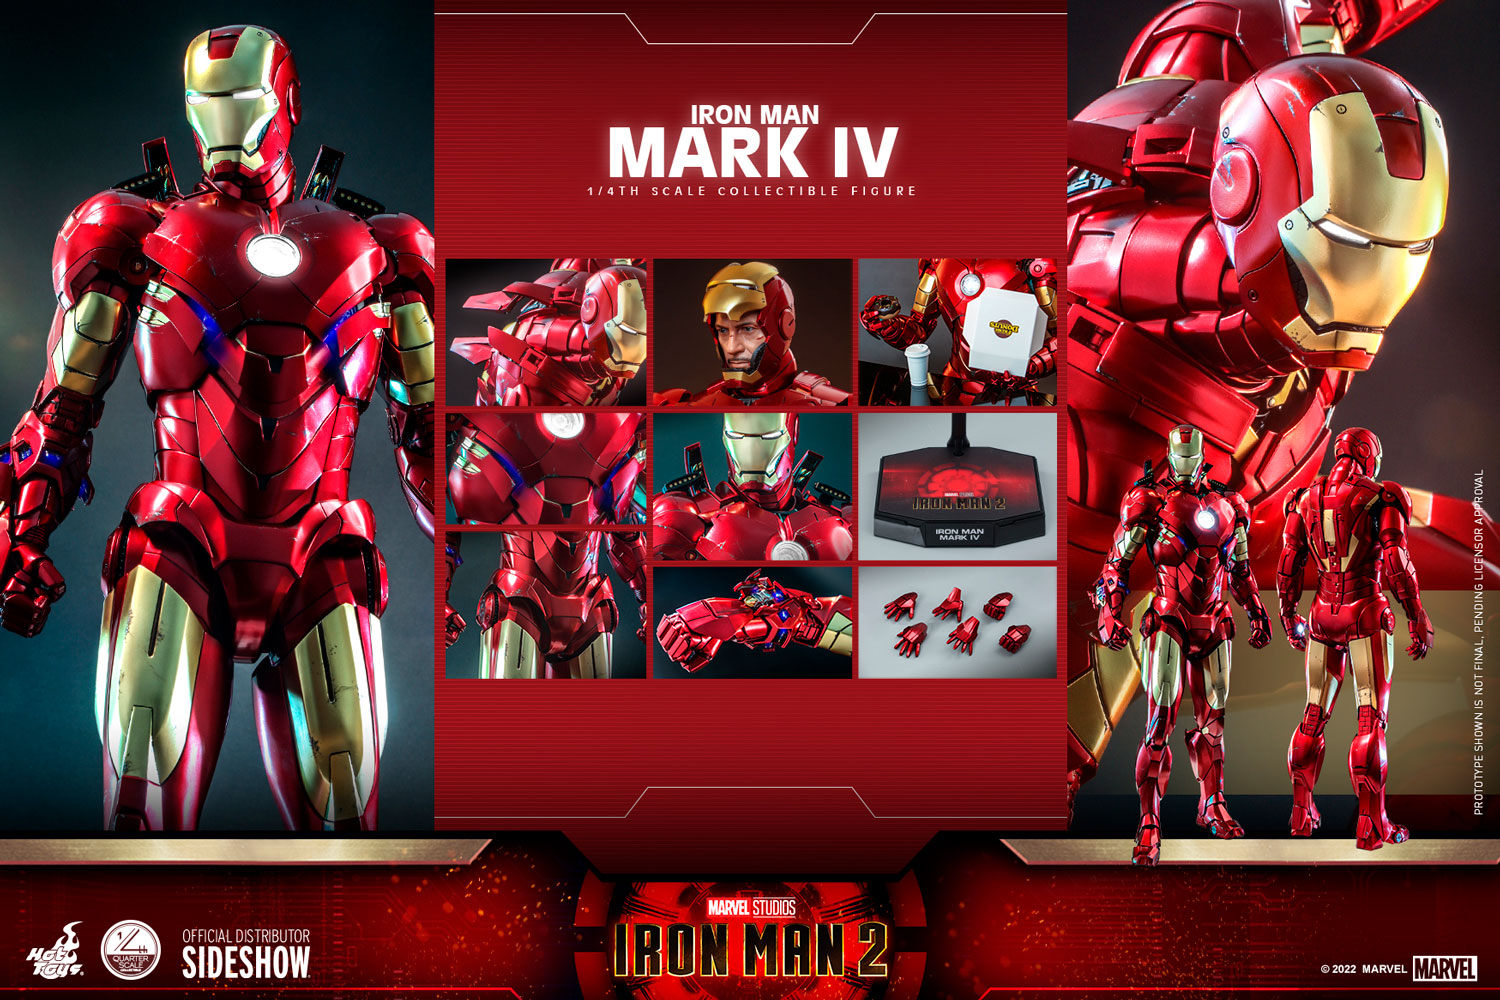 Iron Man Mark IV 1/4 Scale Collectors Edition